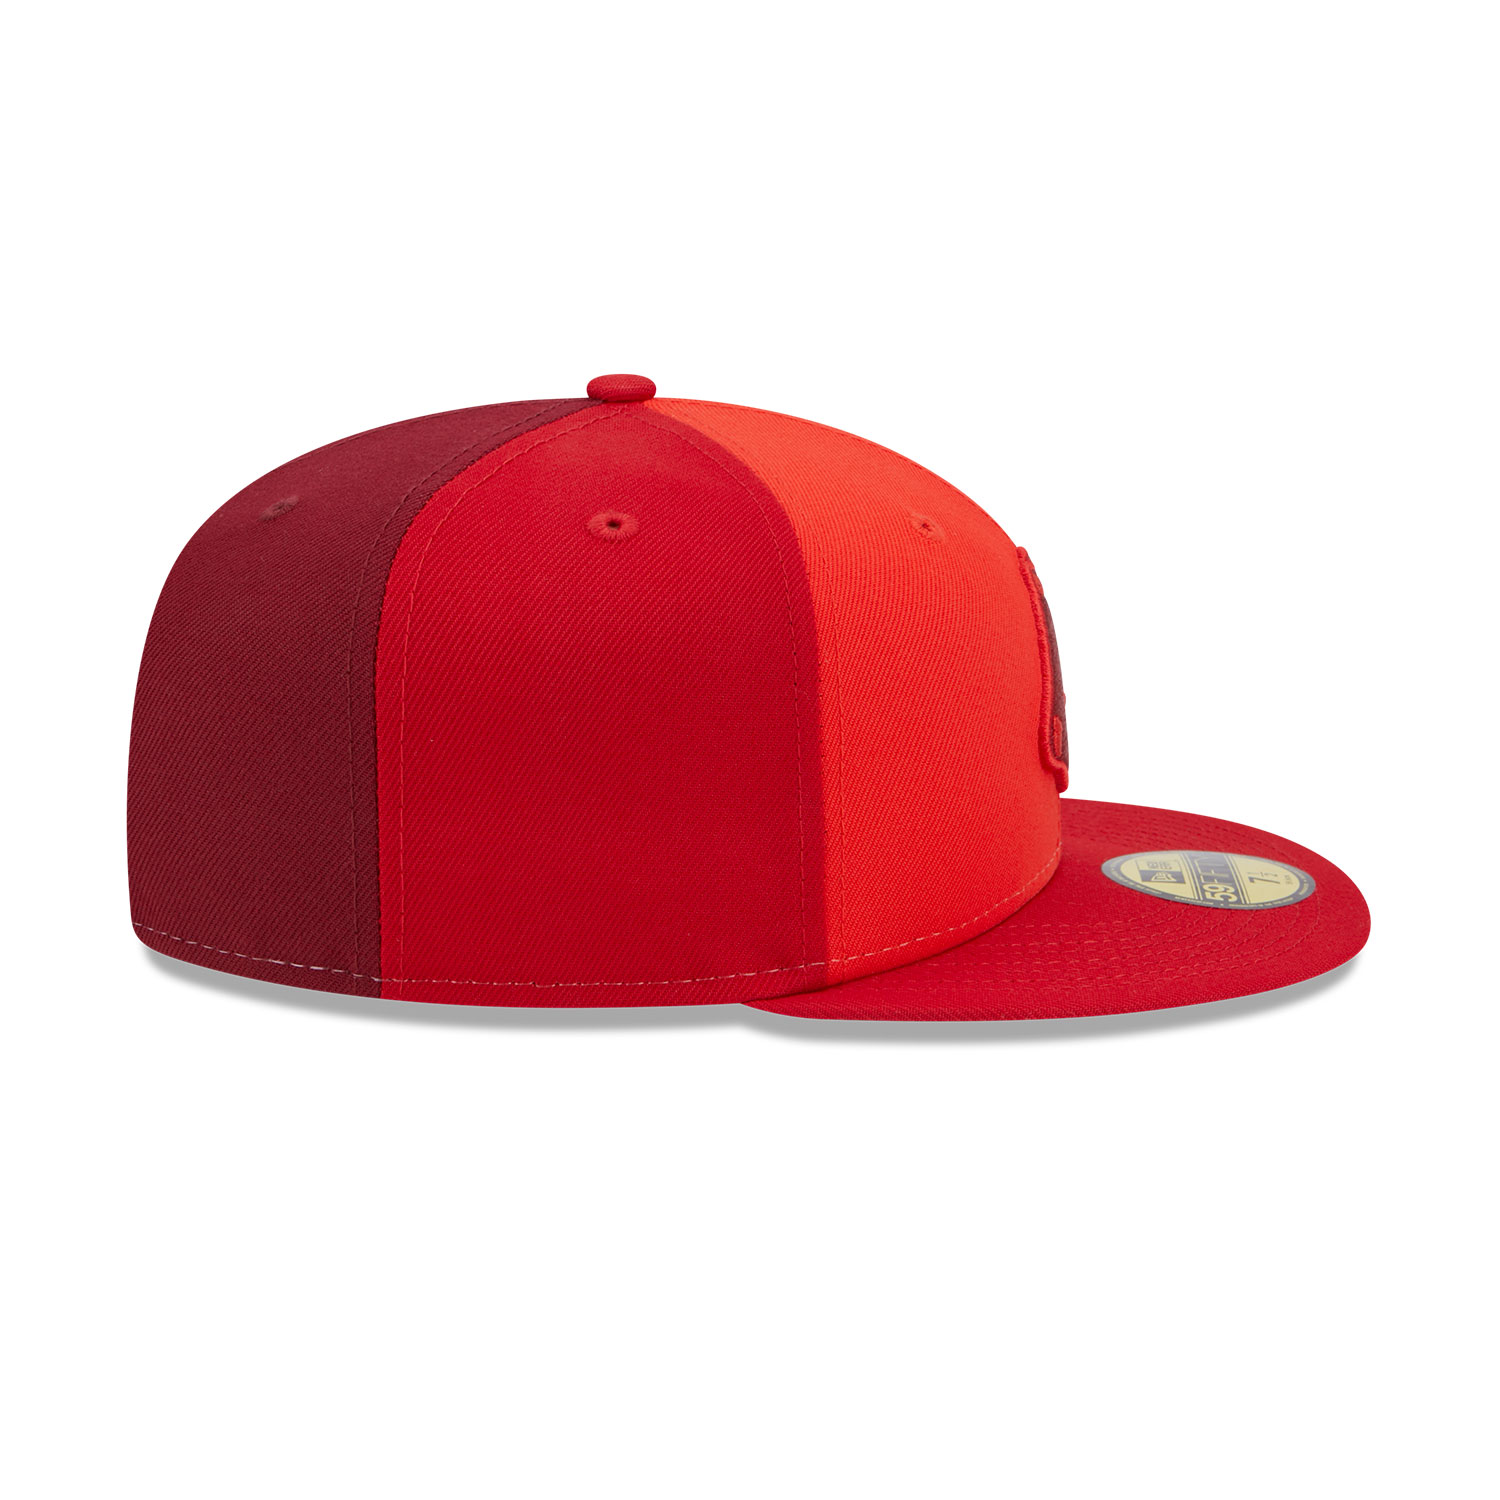 Boston Red Sox Tri Tone Team Red 59FIFTY Fitted Cap